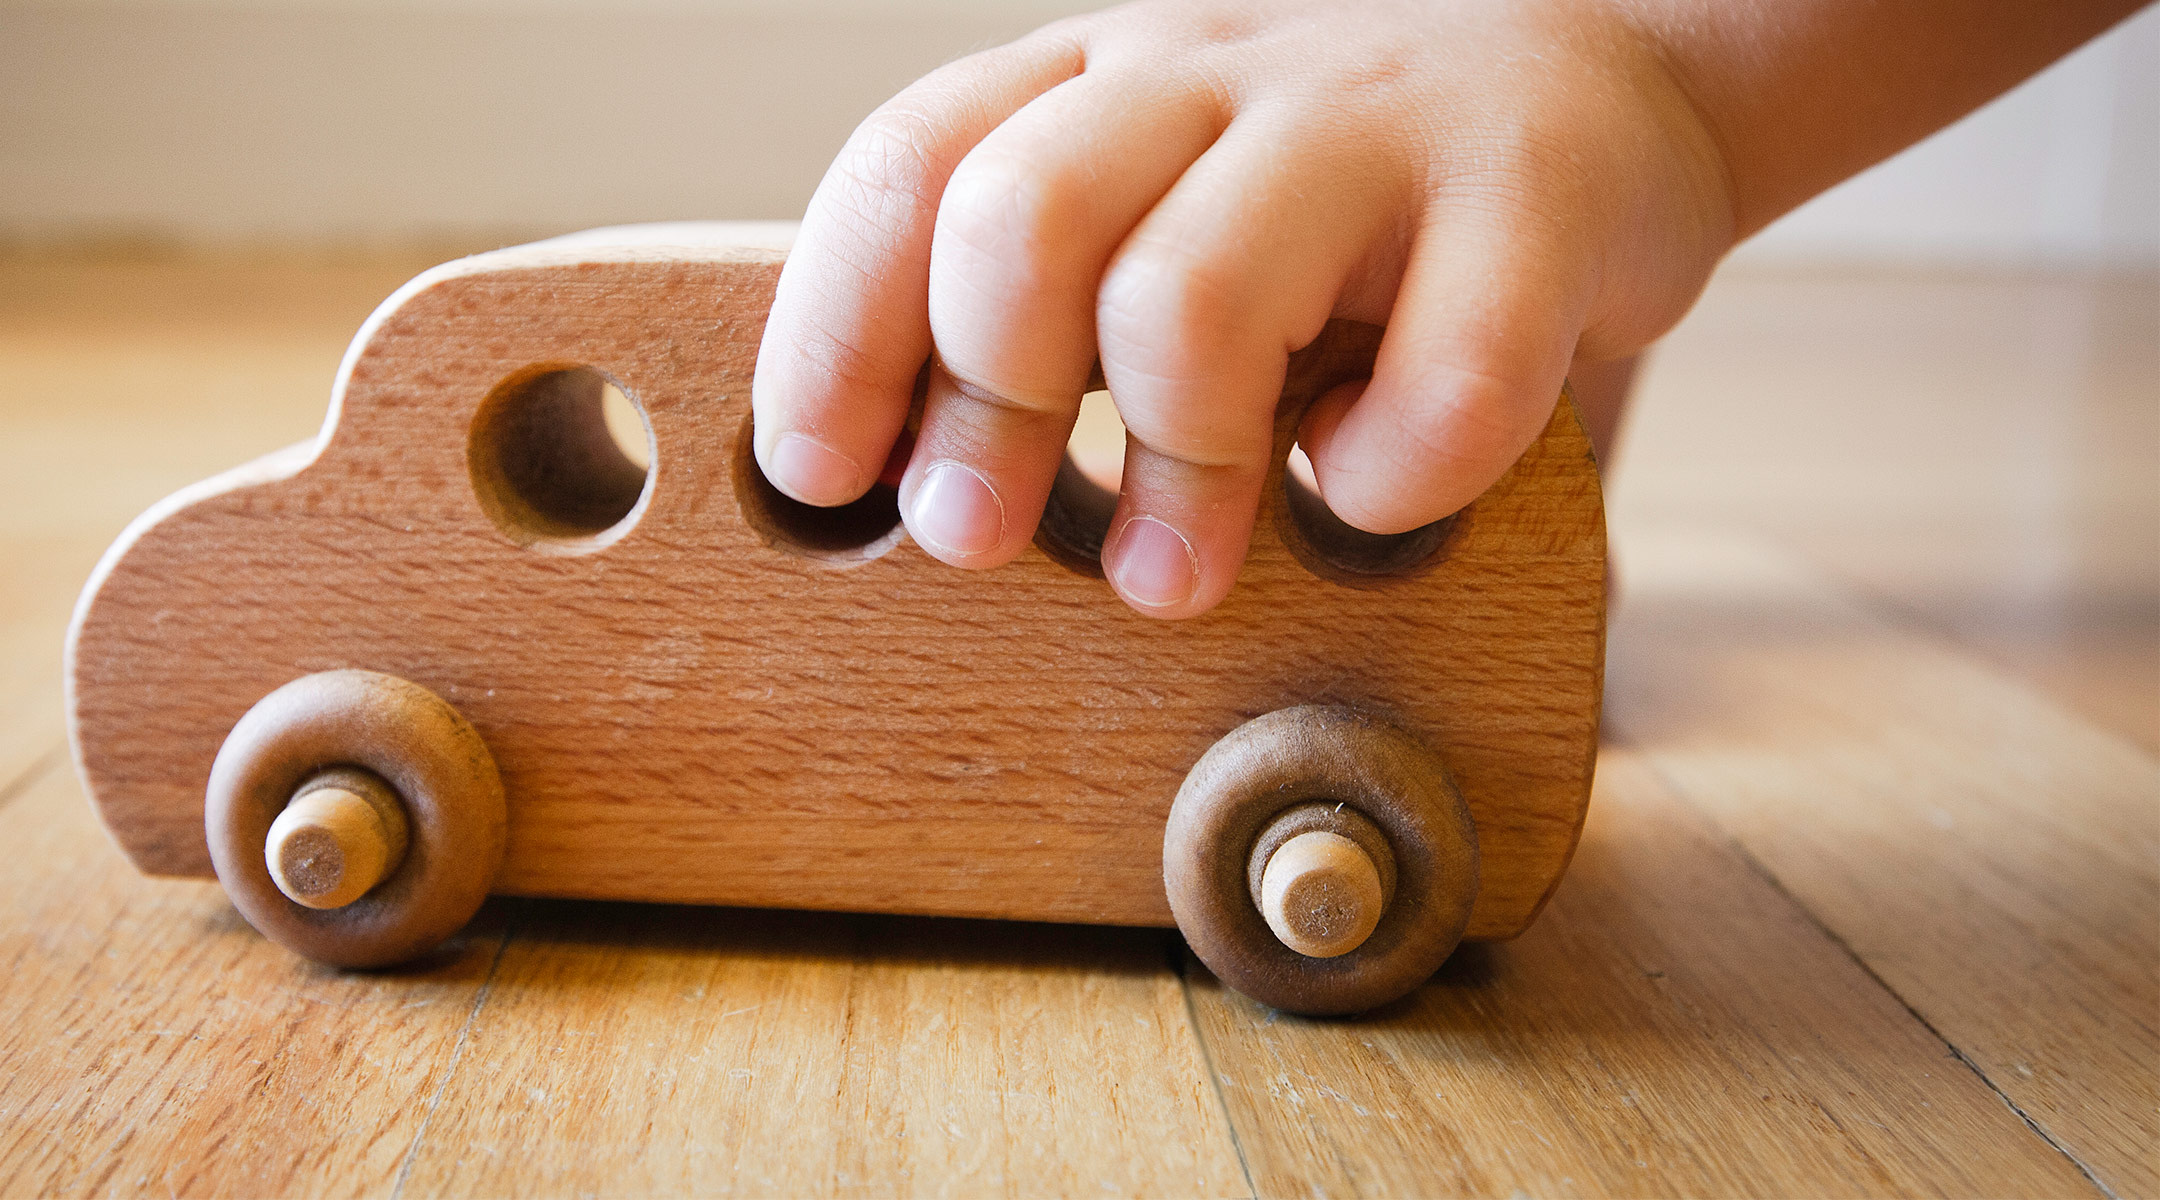 How To Make Wooden Toys With Wheels